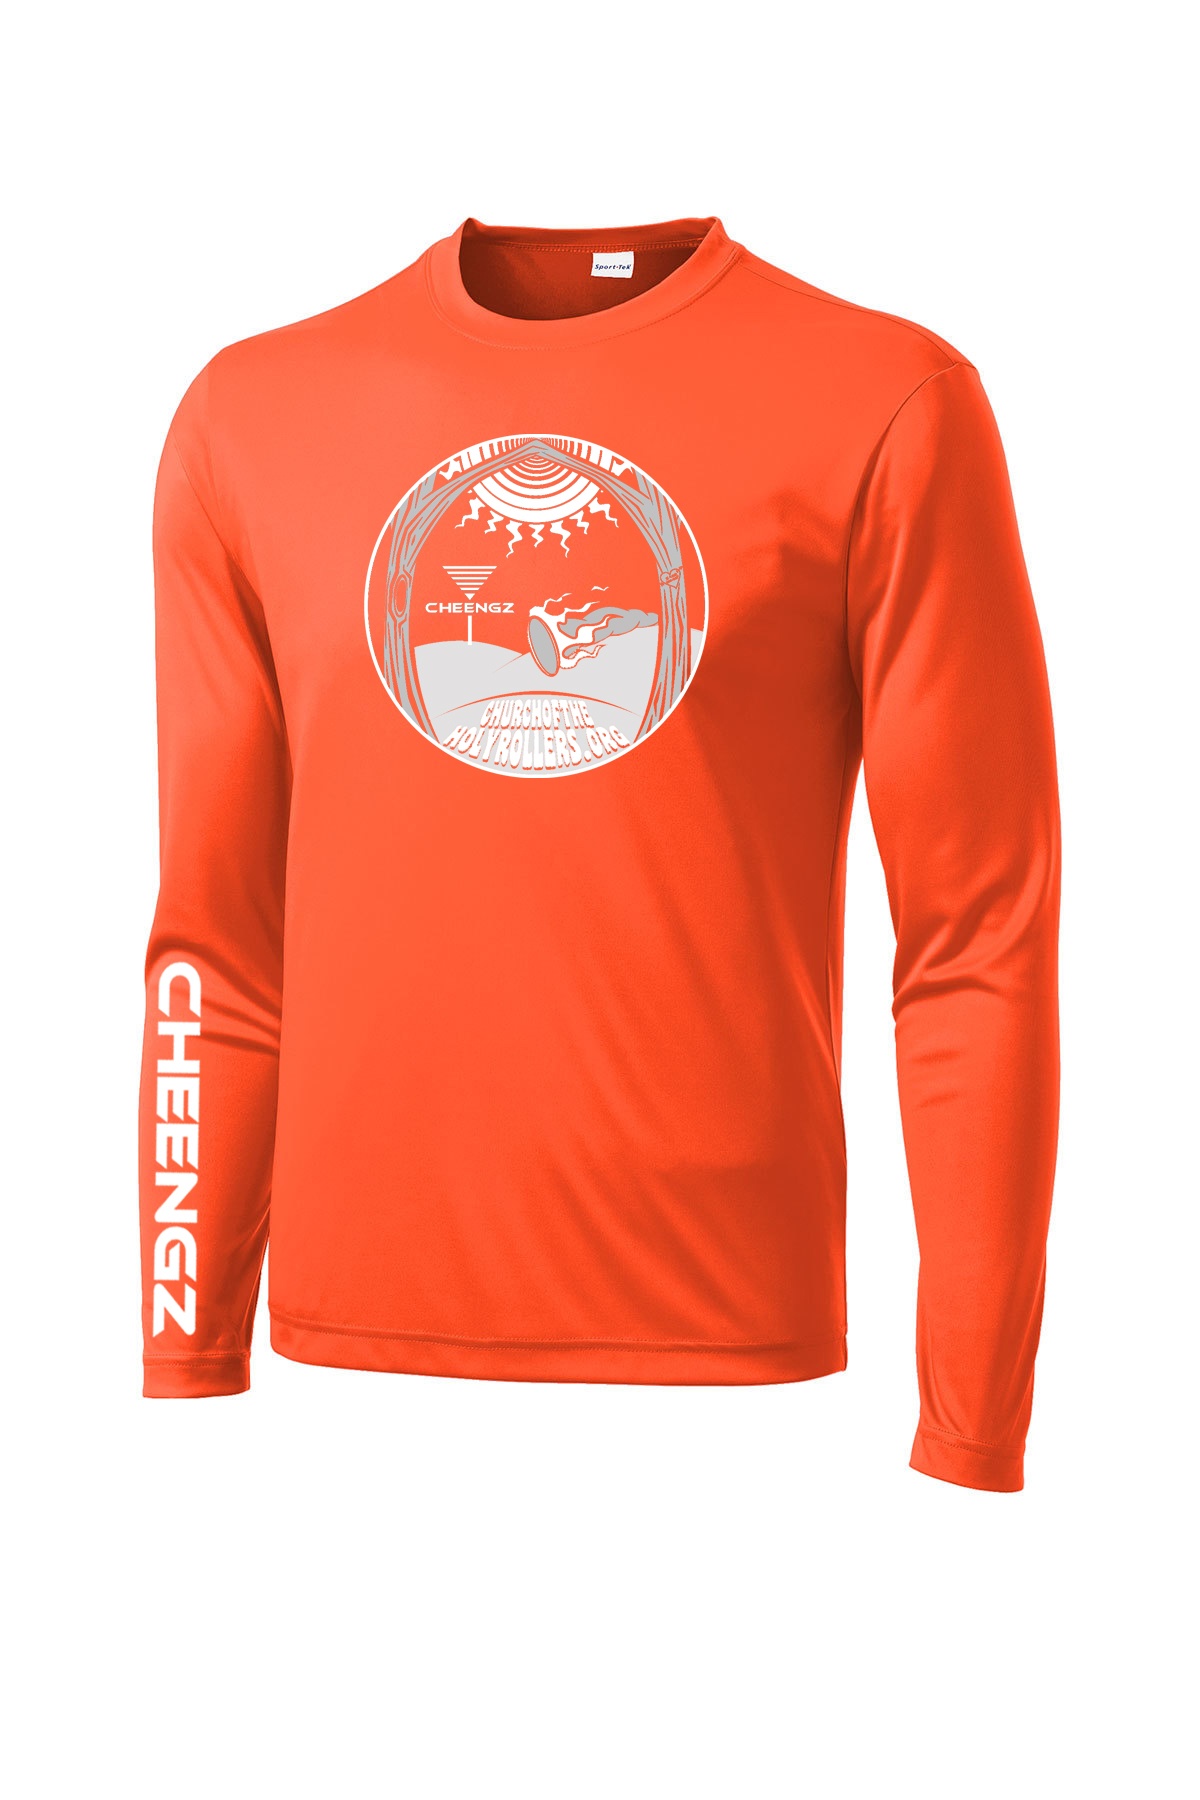 The Church of The Holy Rollers Dry Fit Long Sleeve T Shirt Orange – CHEENGZ